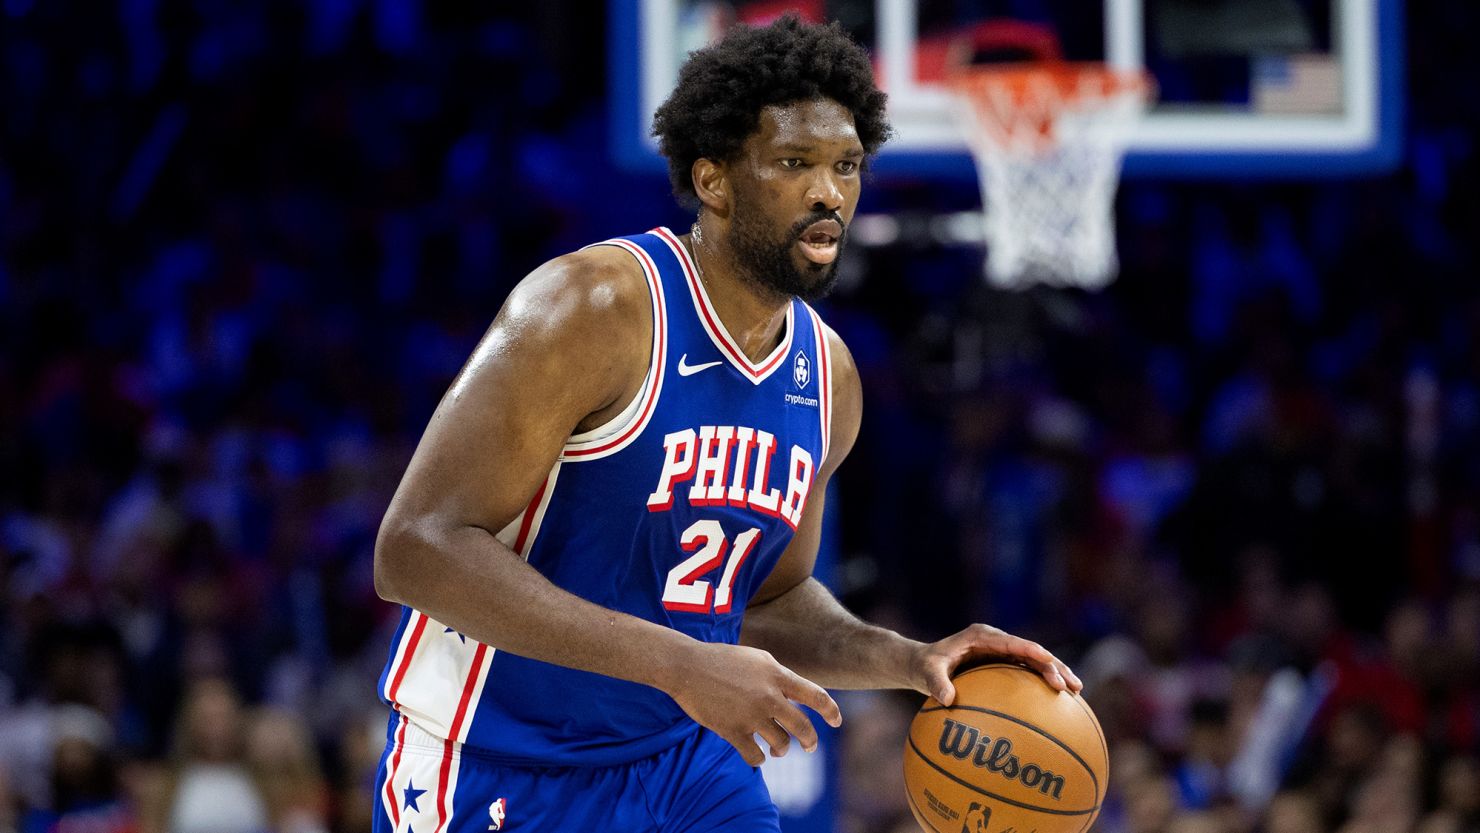 Embiid is also suffering from the lingering effects of a knee injury that cut his regular season short.